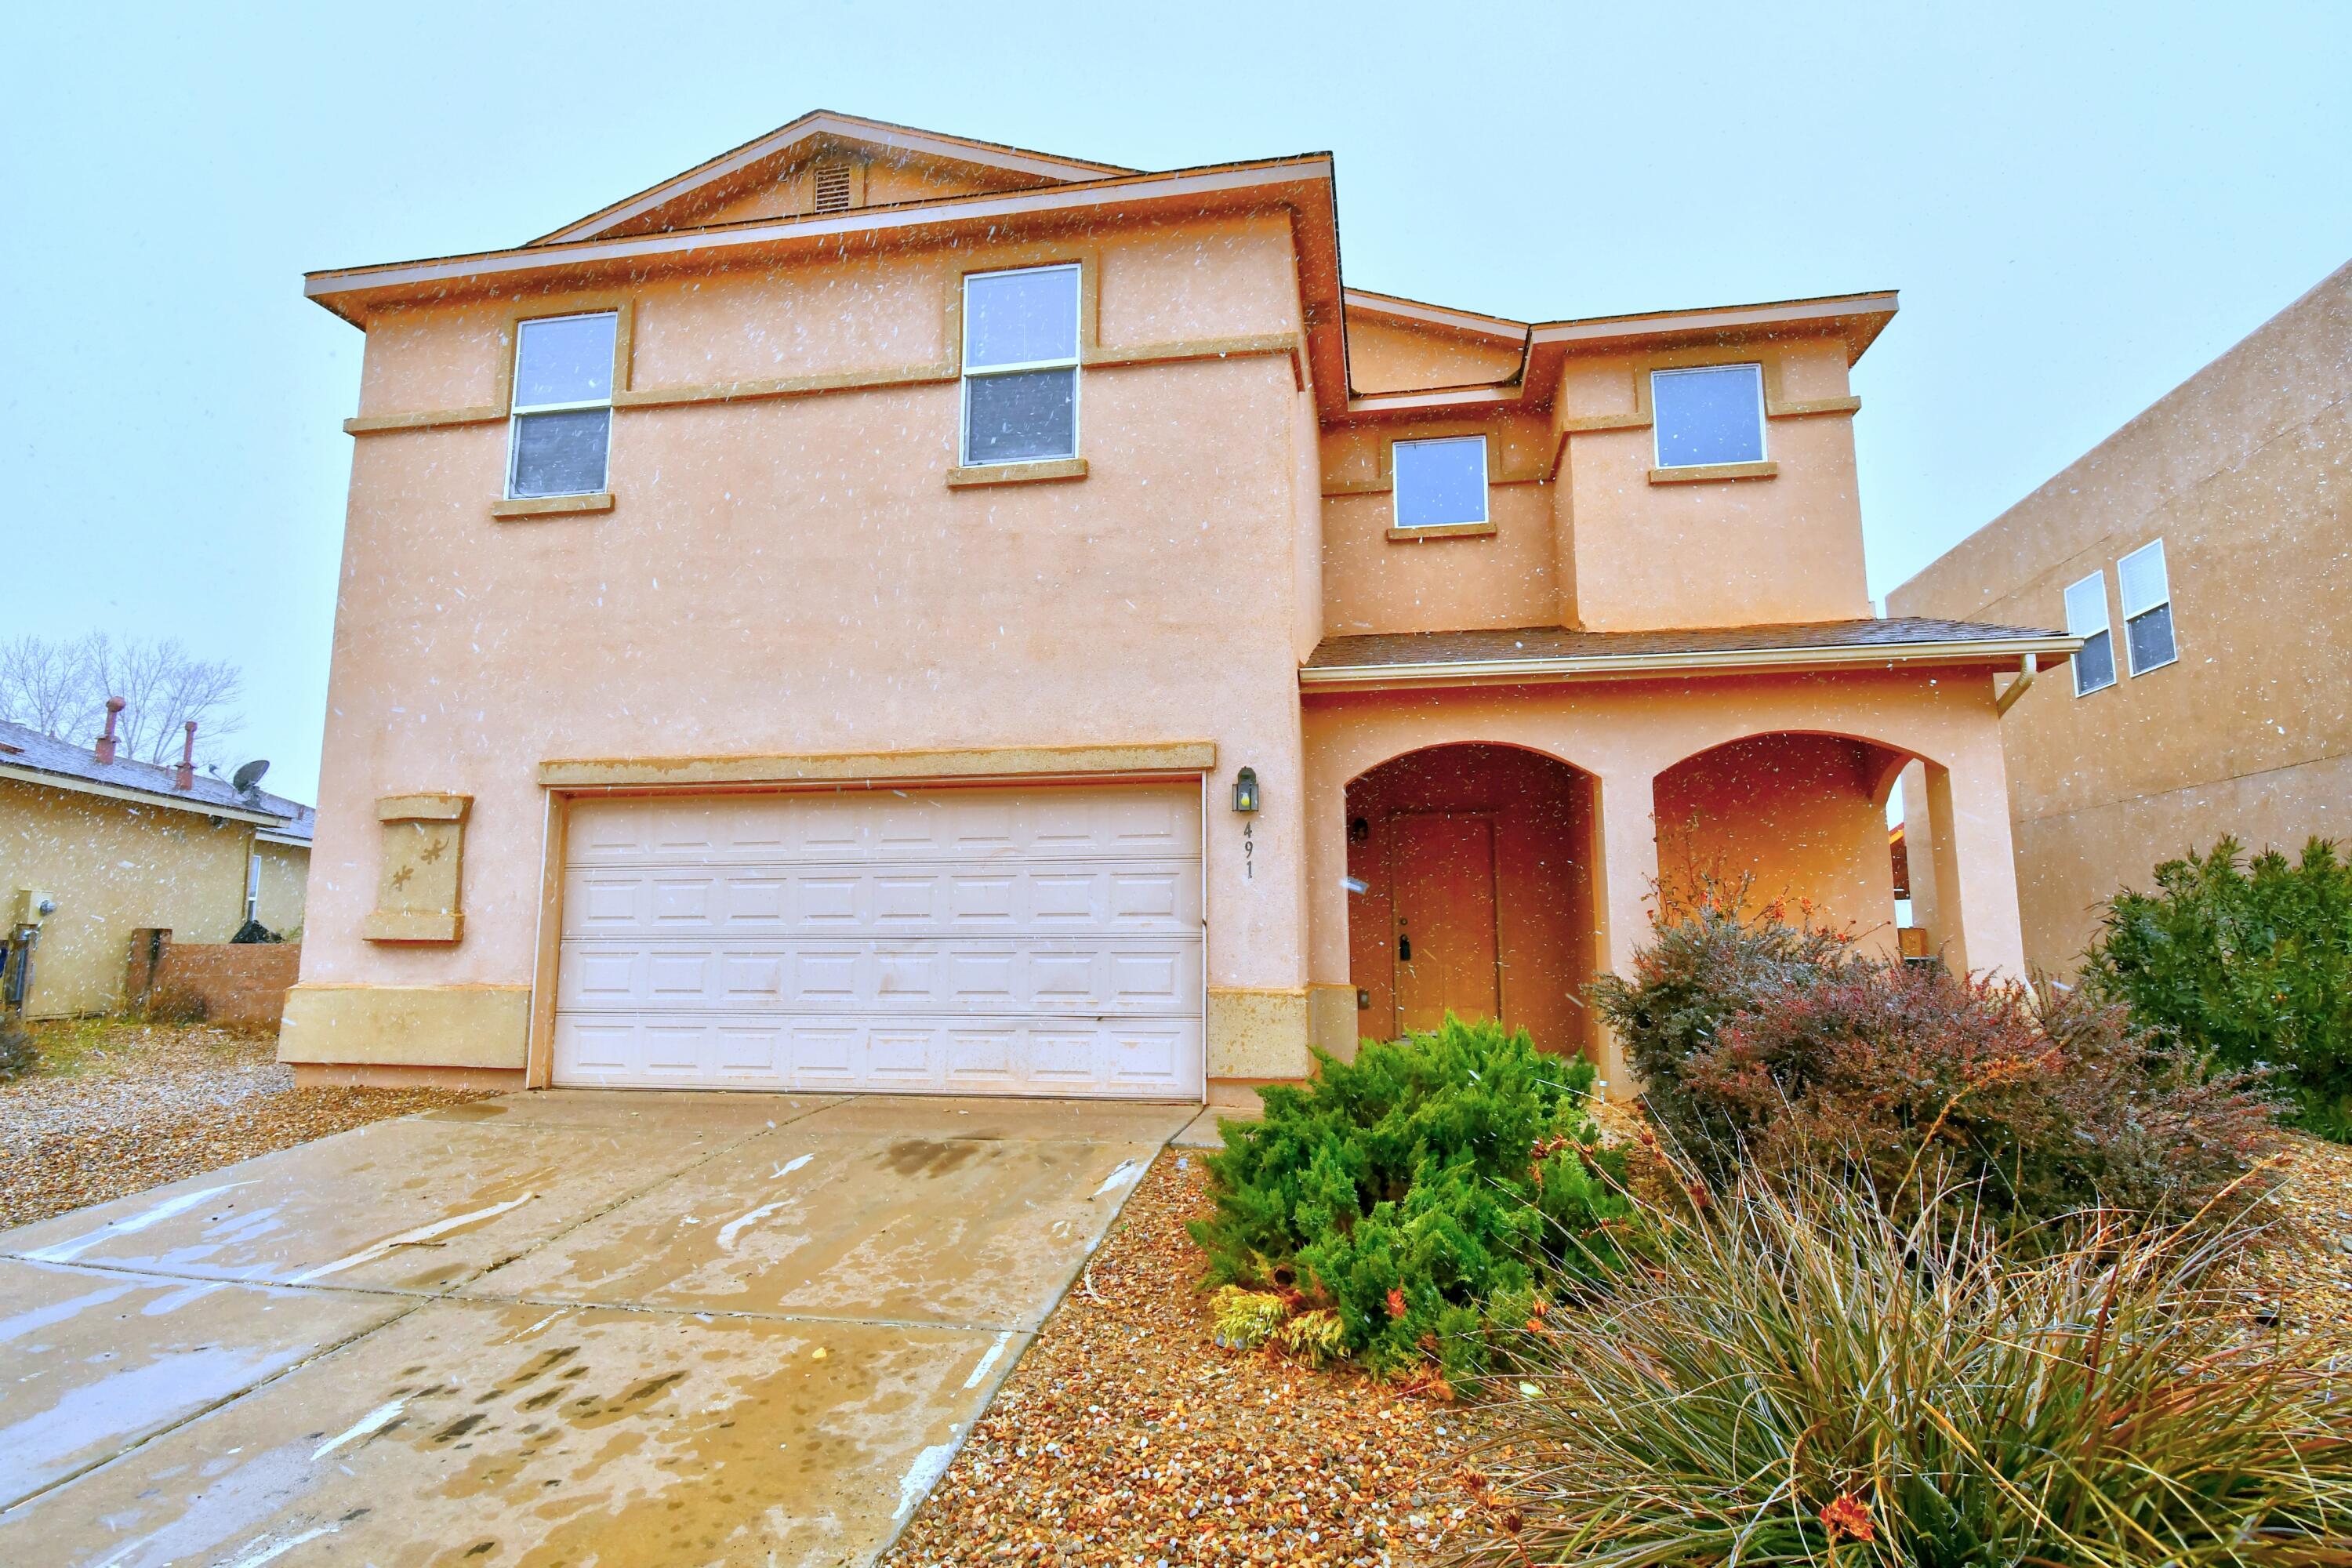 Priced to sell! Big 4 possibly 5 bedroom home with 2 living areas. Very livable floorplan. Kitchen offers solid surface counters and stainless appliances. Large back yard with a covered patio. This desirable neighborhood is less than 20 minutes to Albuquerque.